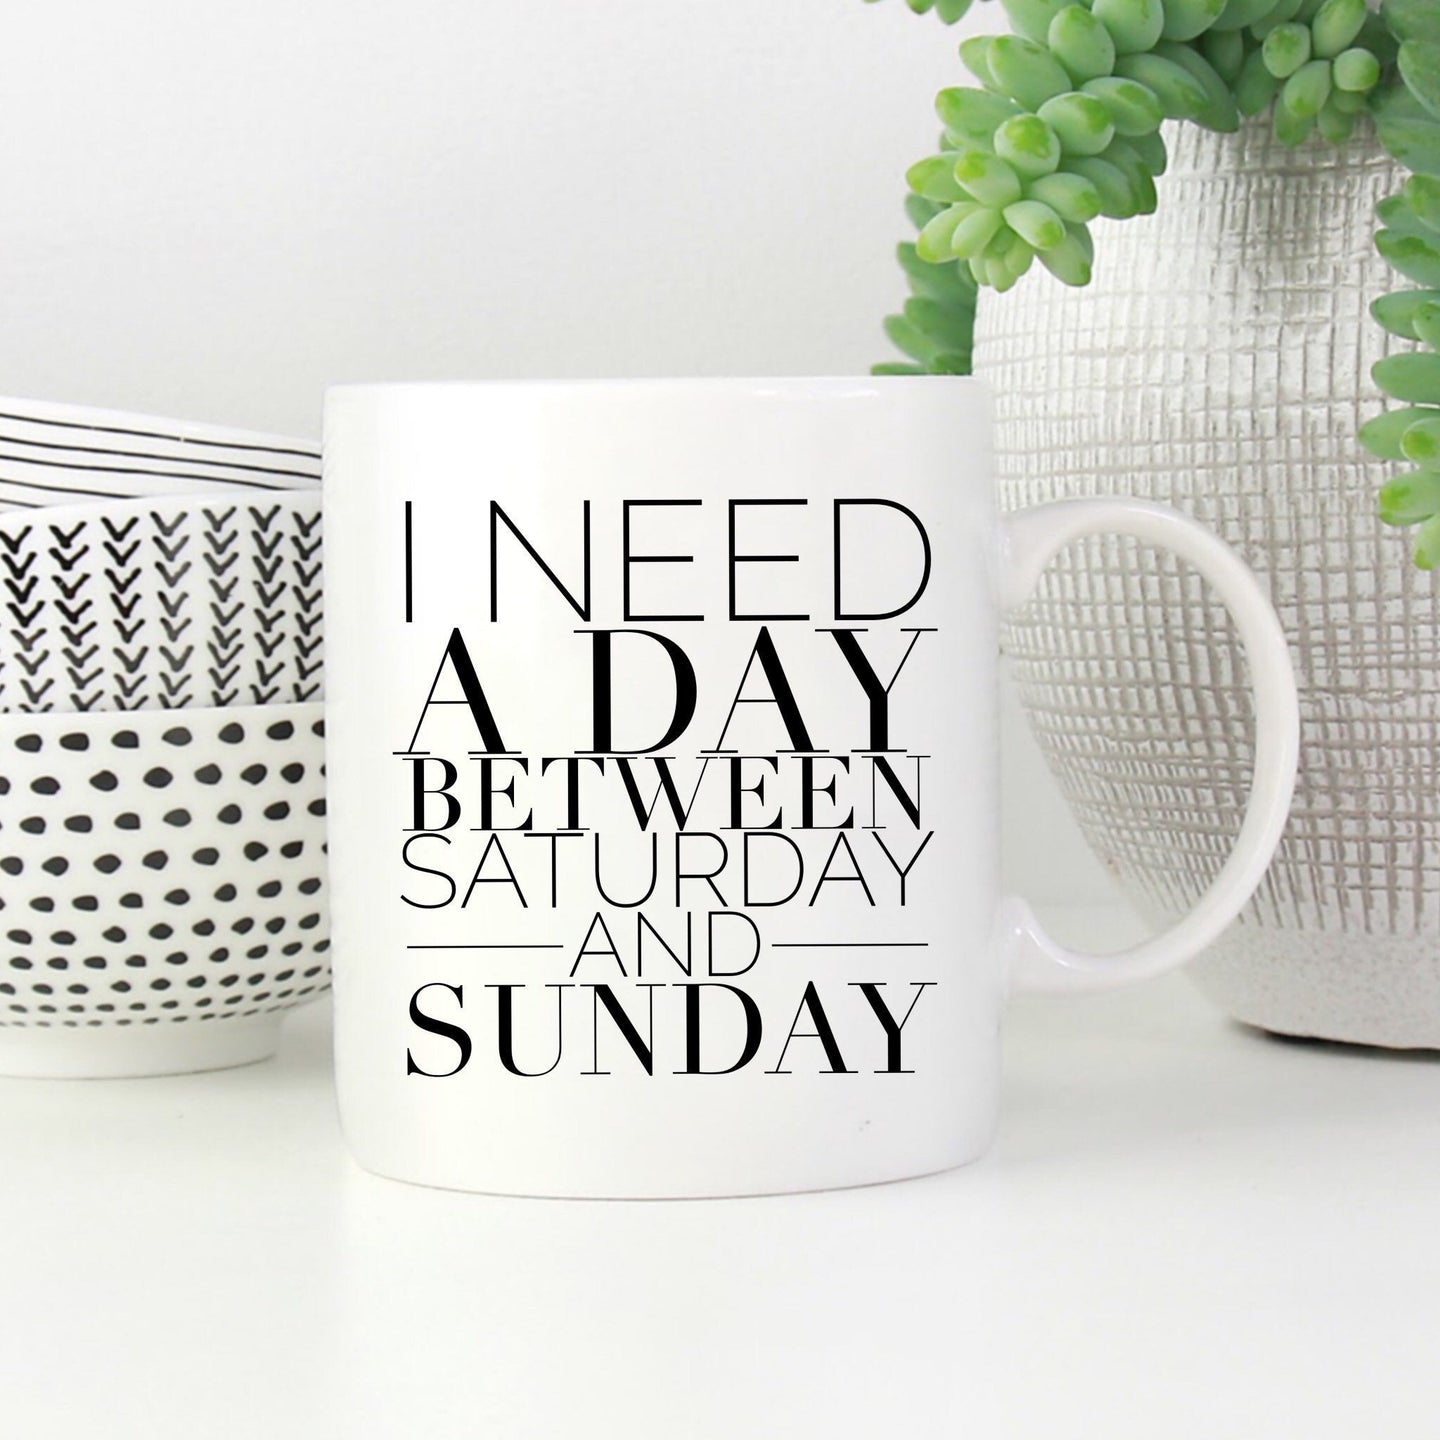 I need a day between Saturday and Sunday